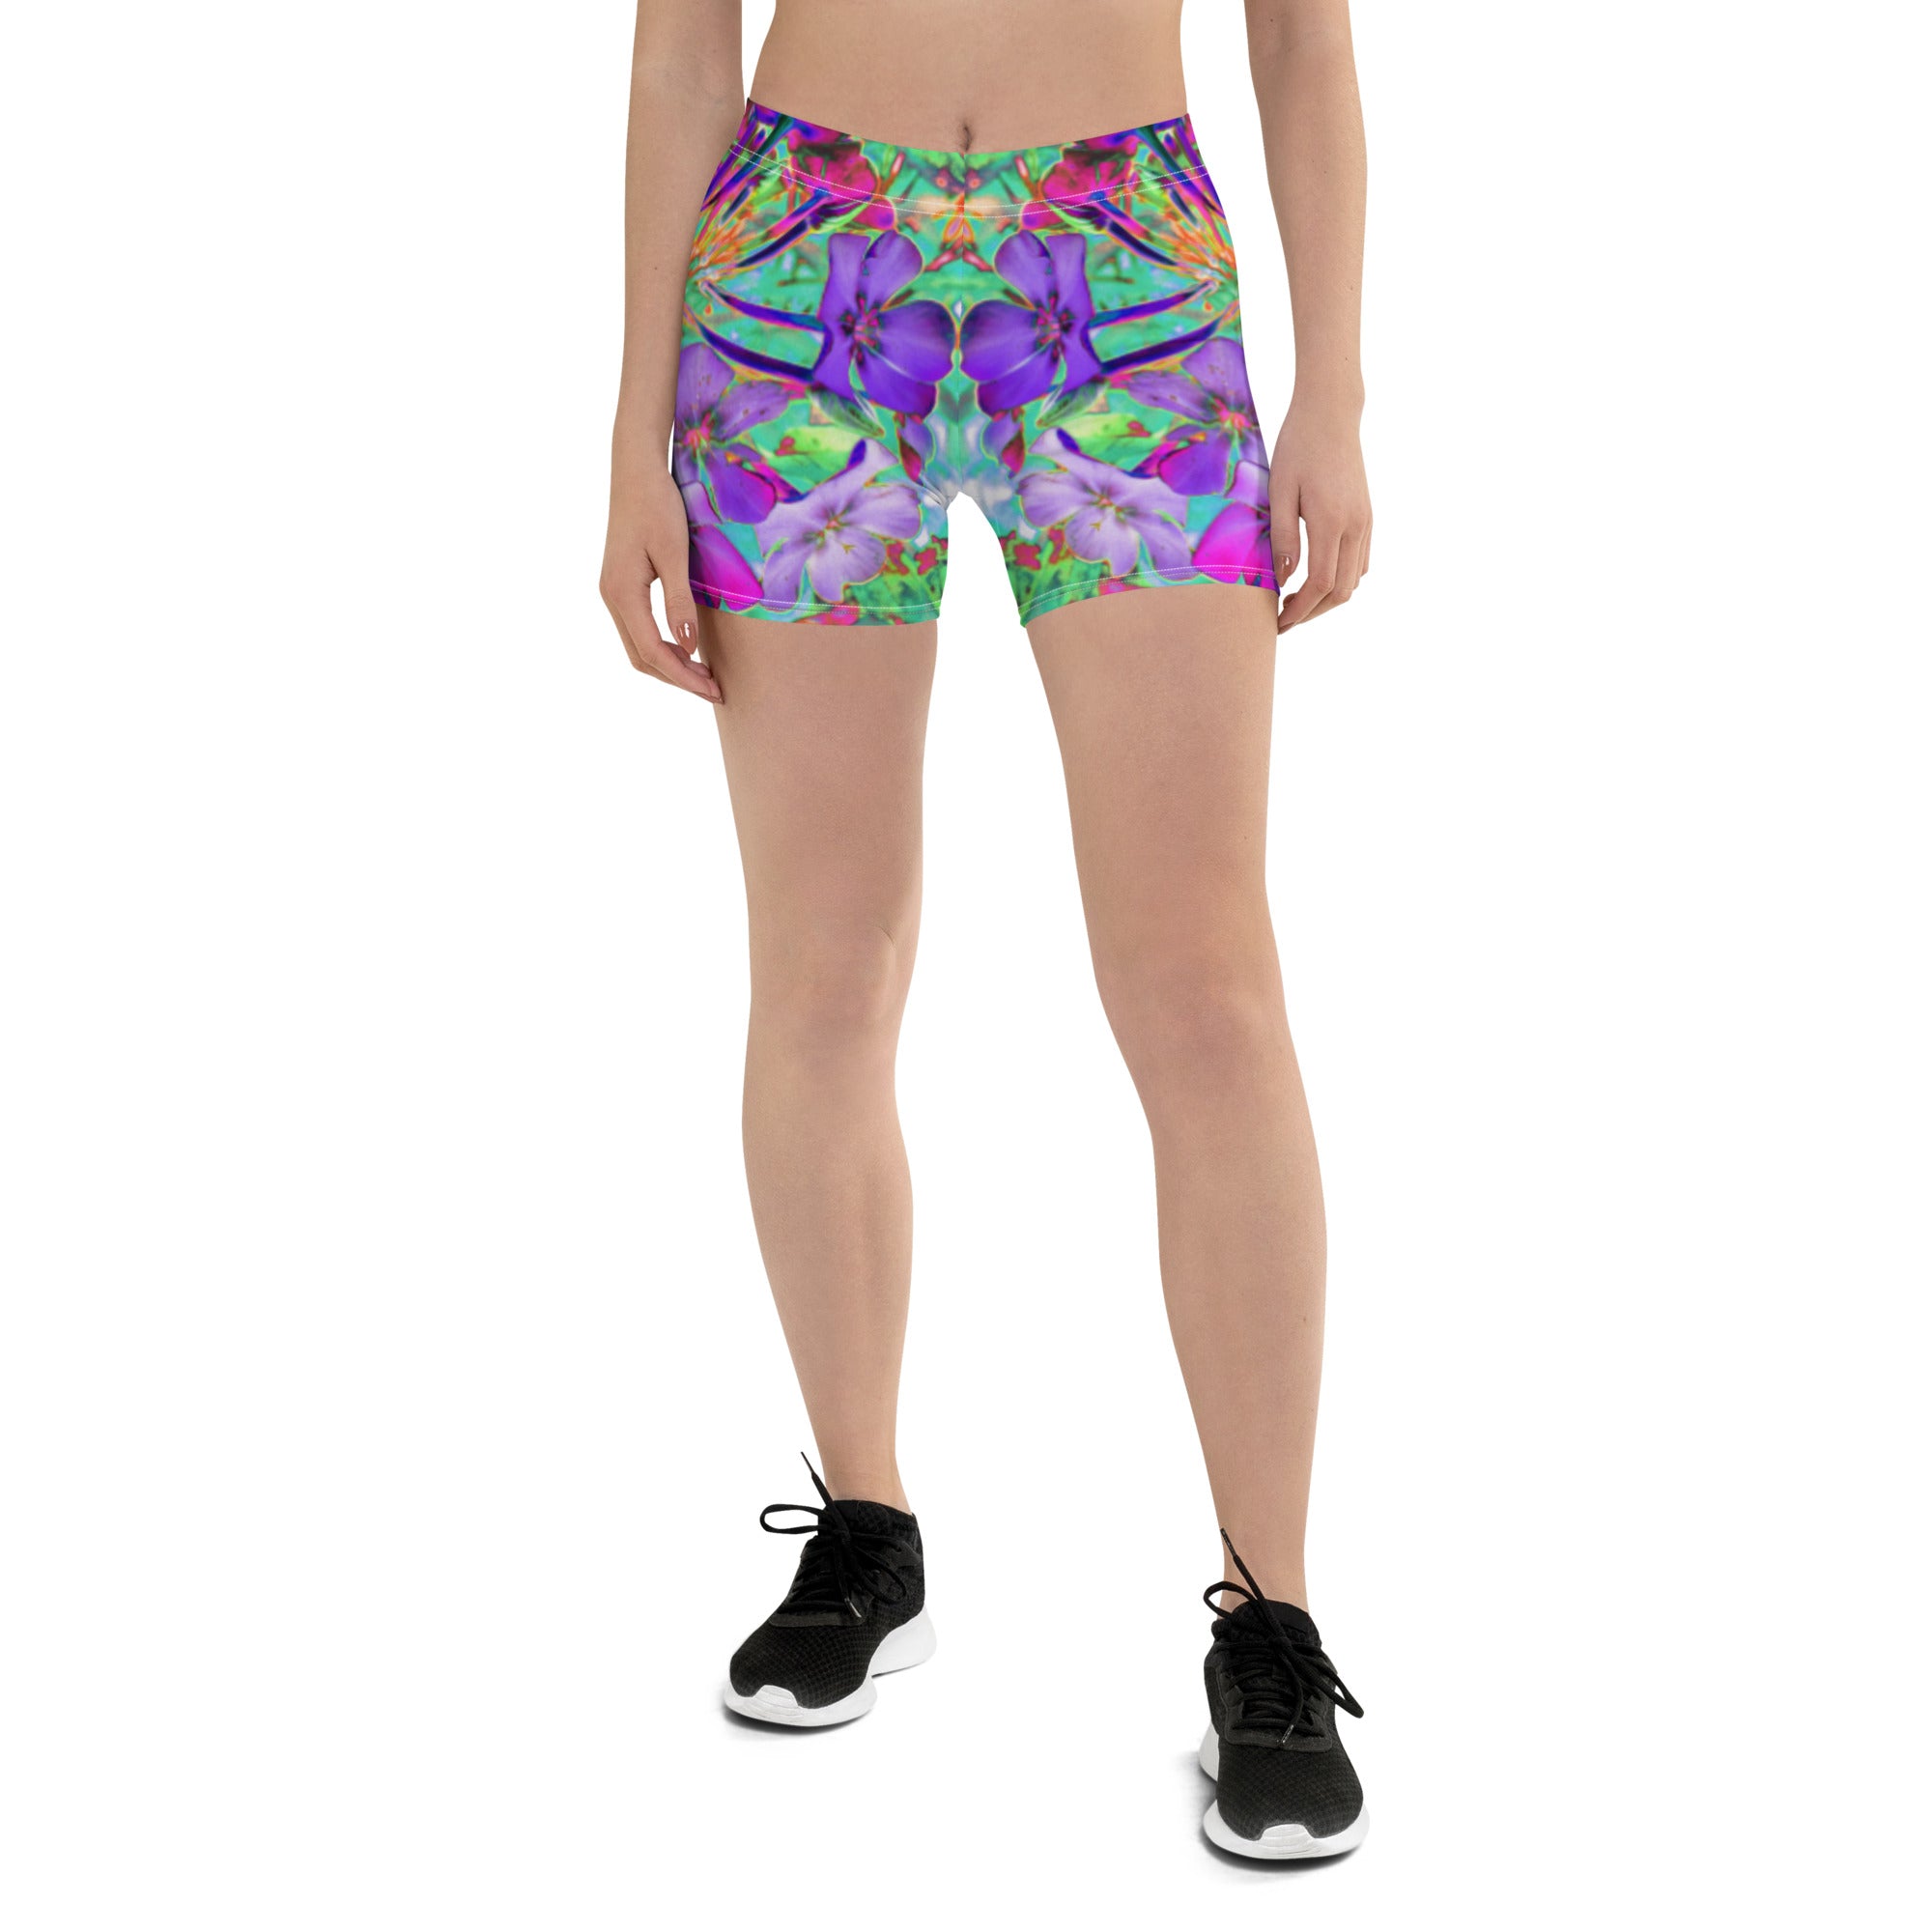 Spandex Shorts, Dramatic Psychedelic Magenta and Purple Flowers